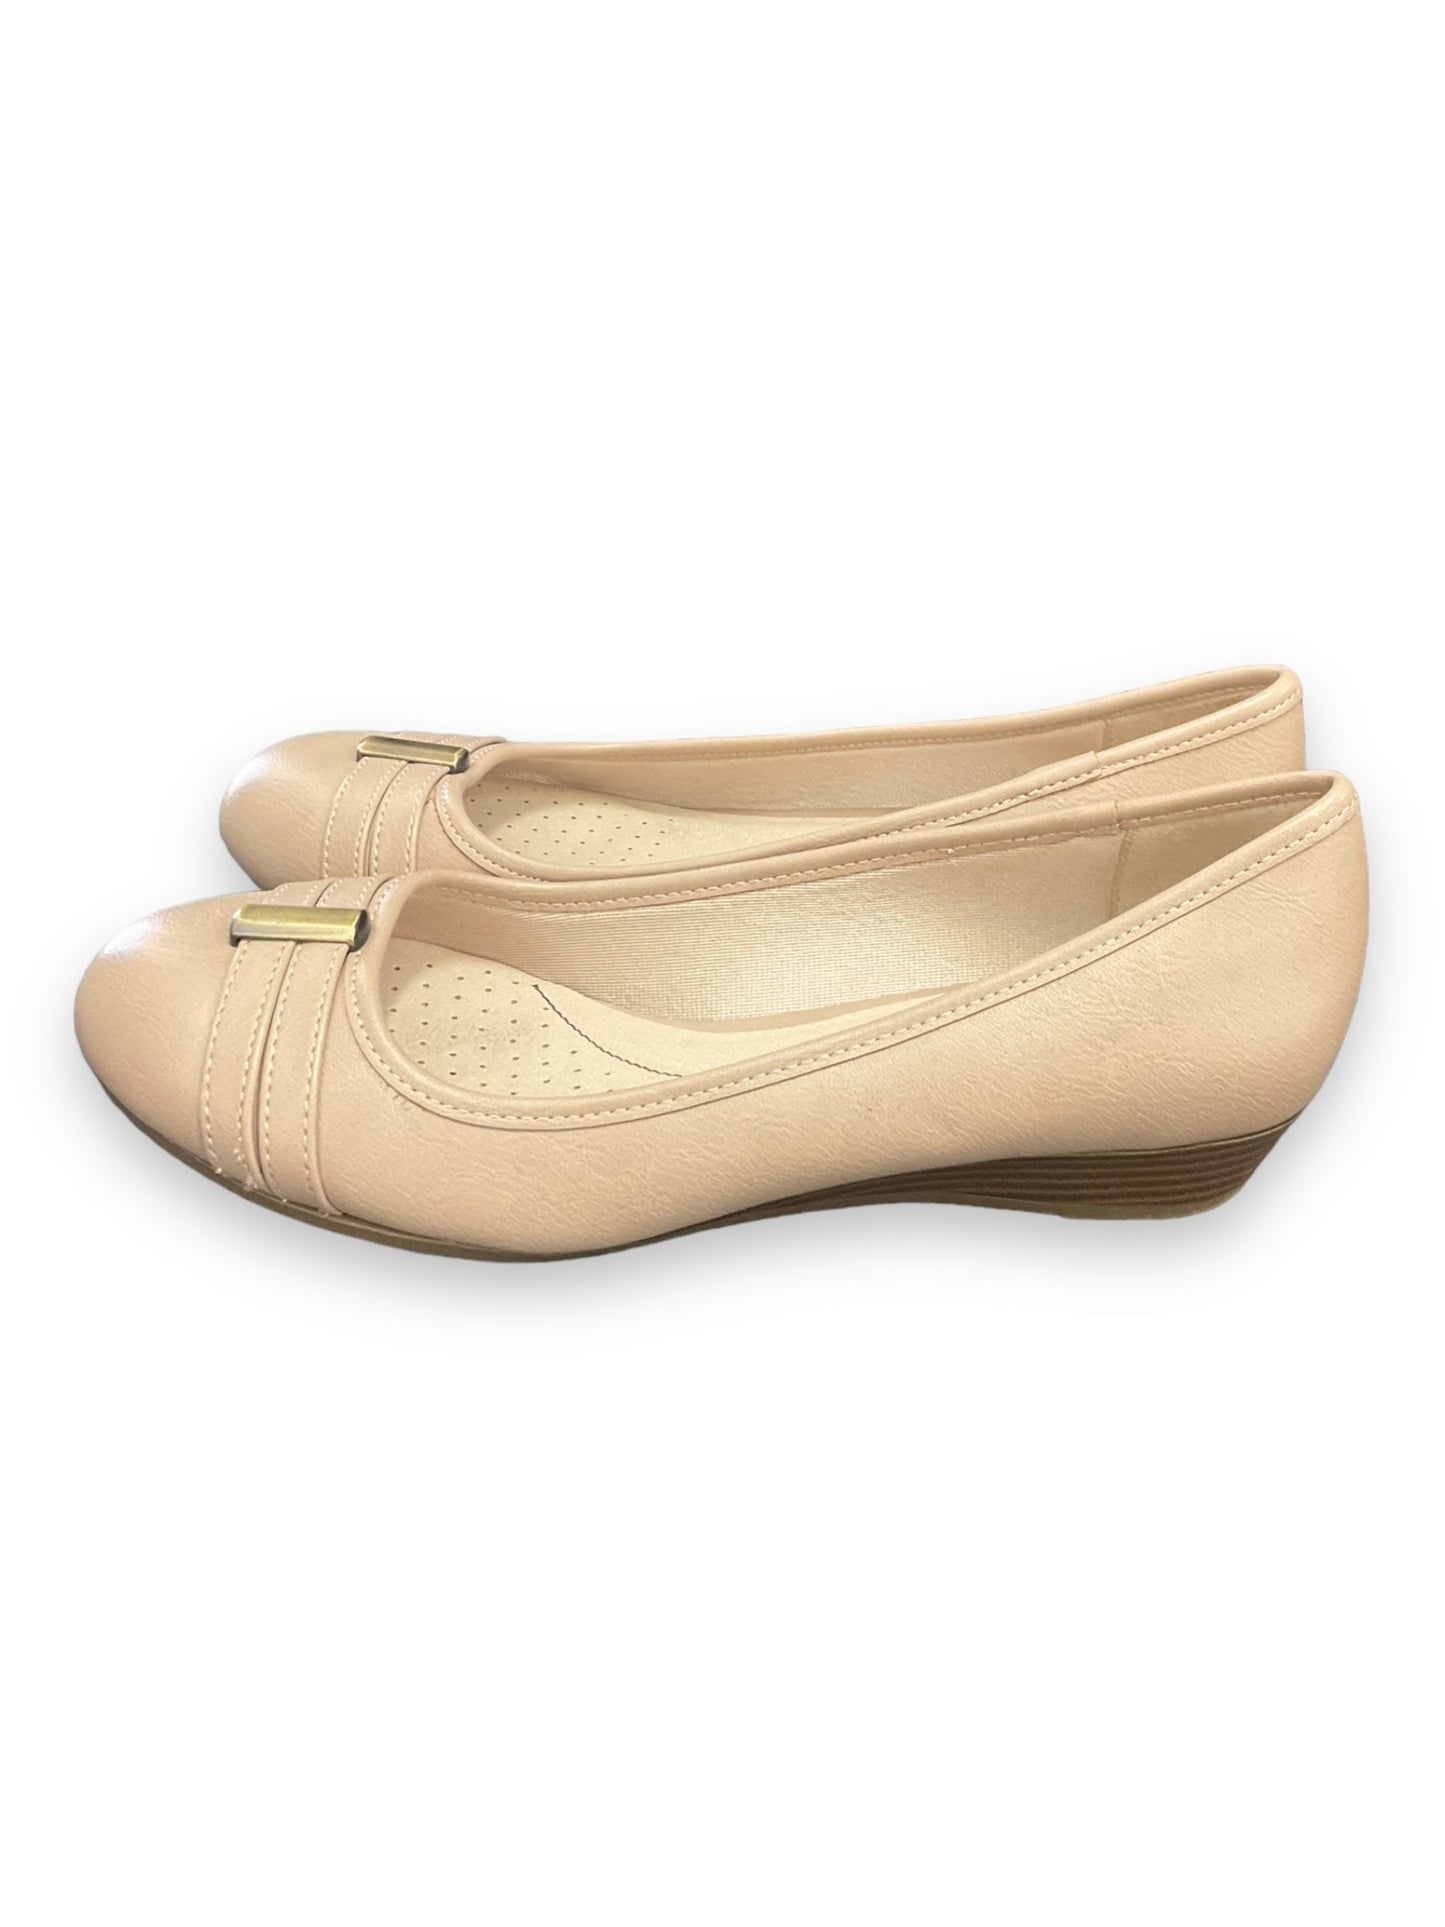 Shoes Flats By Life Stride  Size: 6